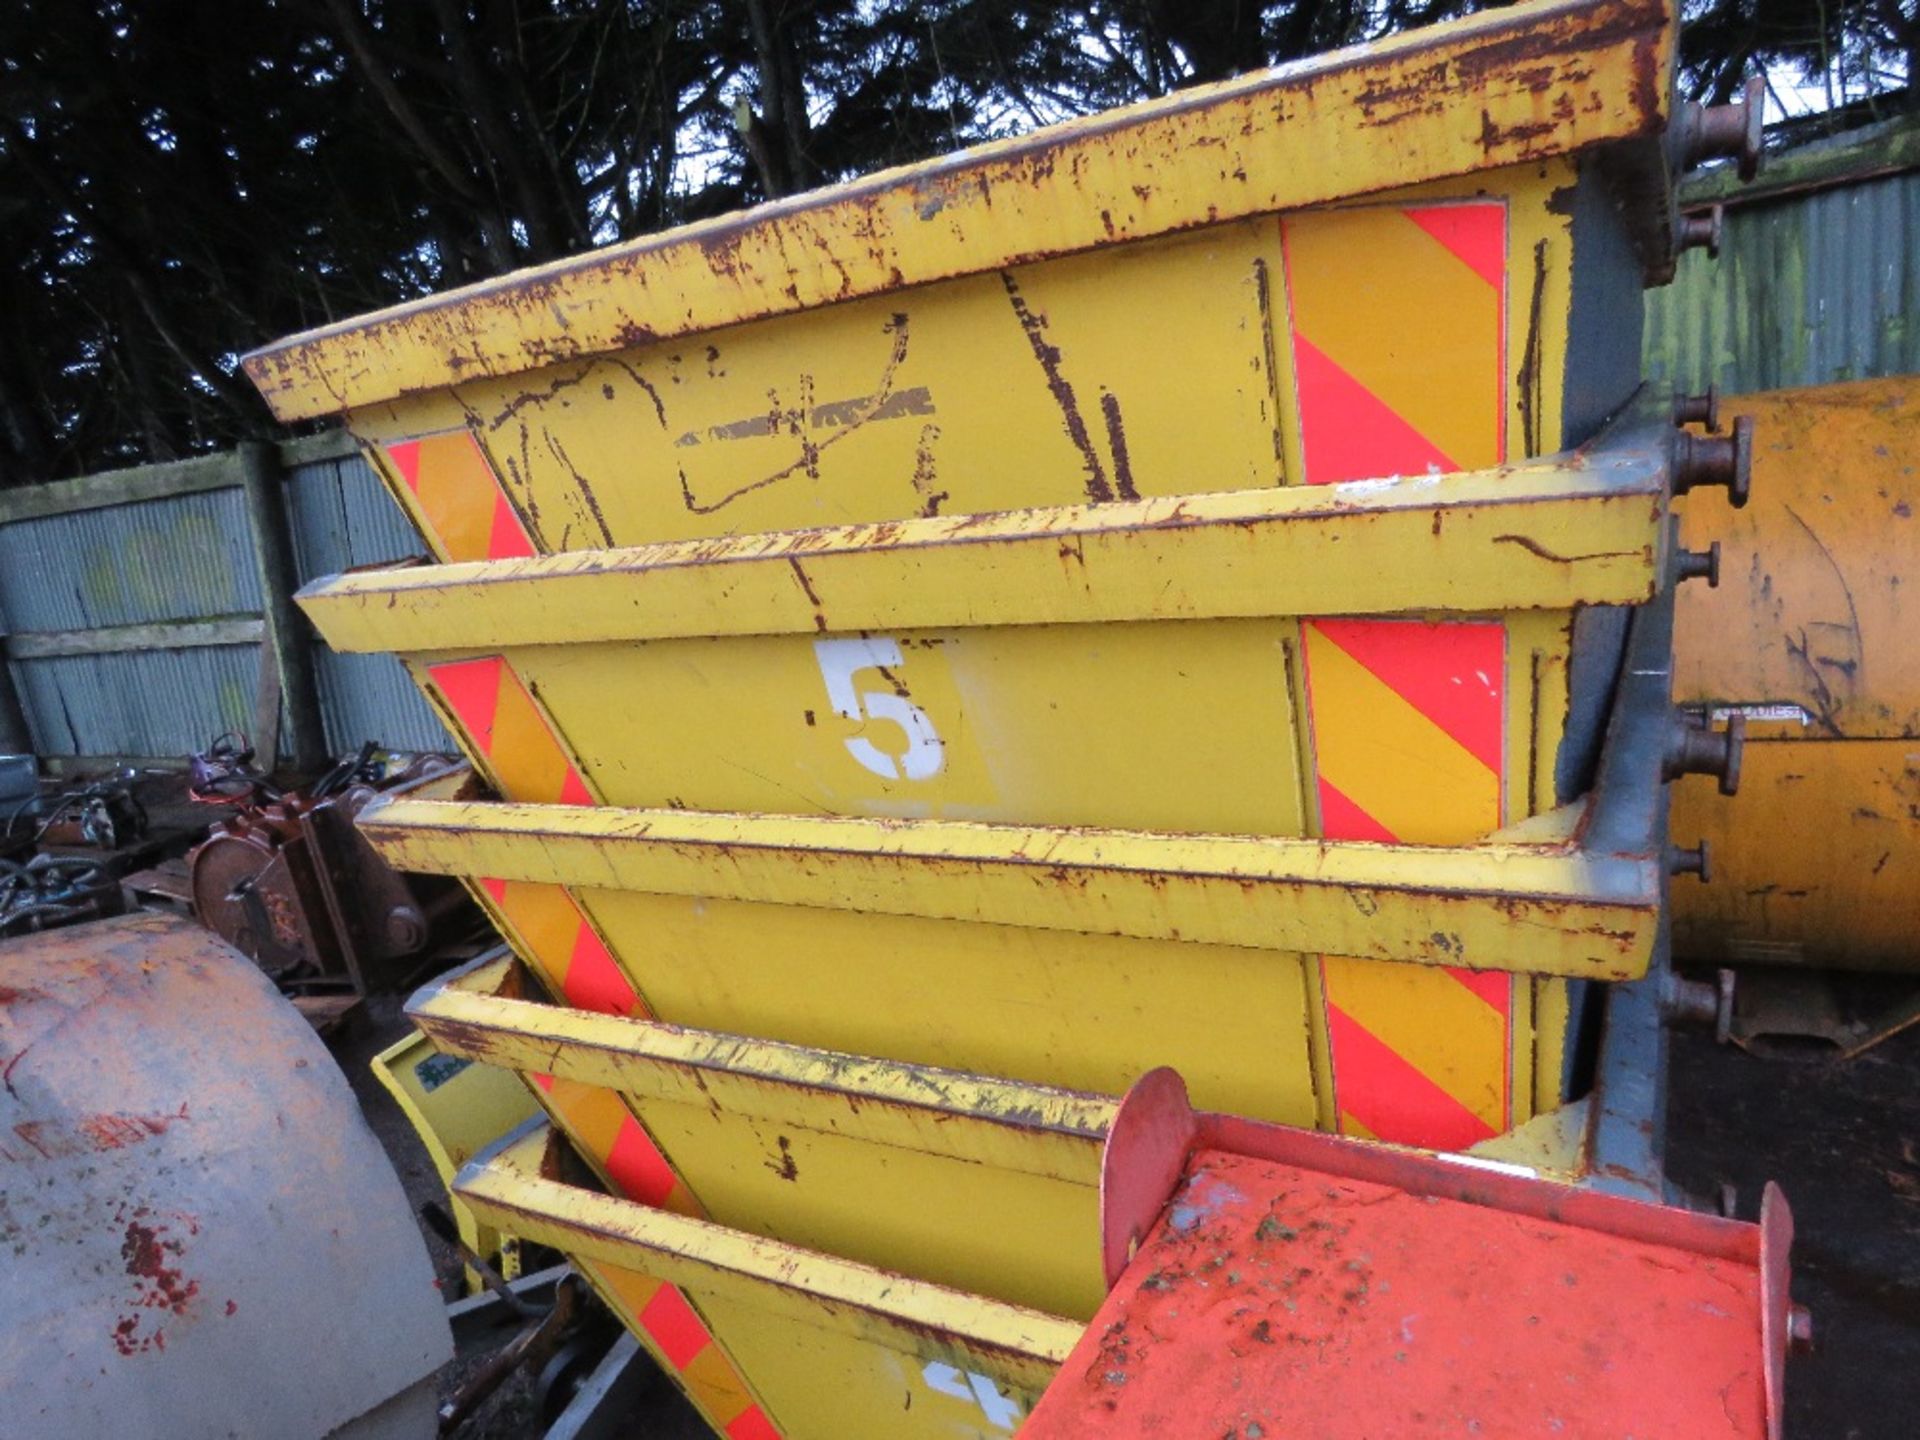 5 X CHAIN LIFT WASTE SKIPS, 2 YARD CAPACITY. DIRECT FROM LOCAL COMPANY WHO ARE DOWNSIZING. - Image 2 of 3